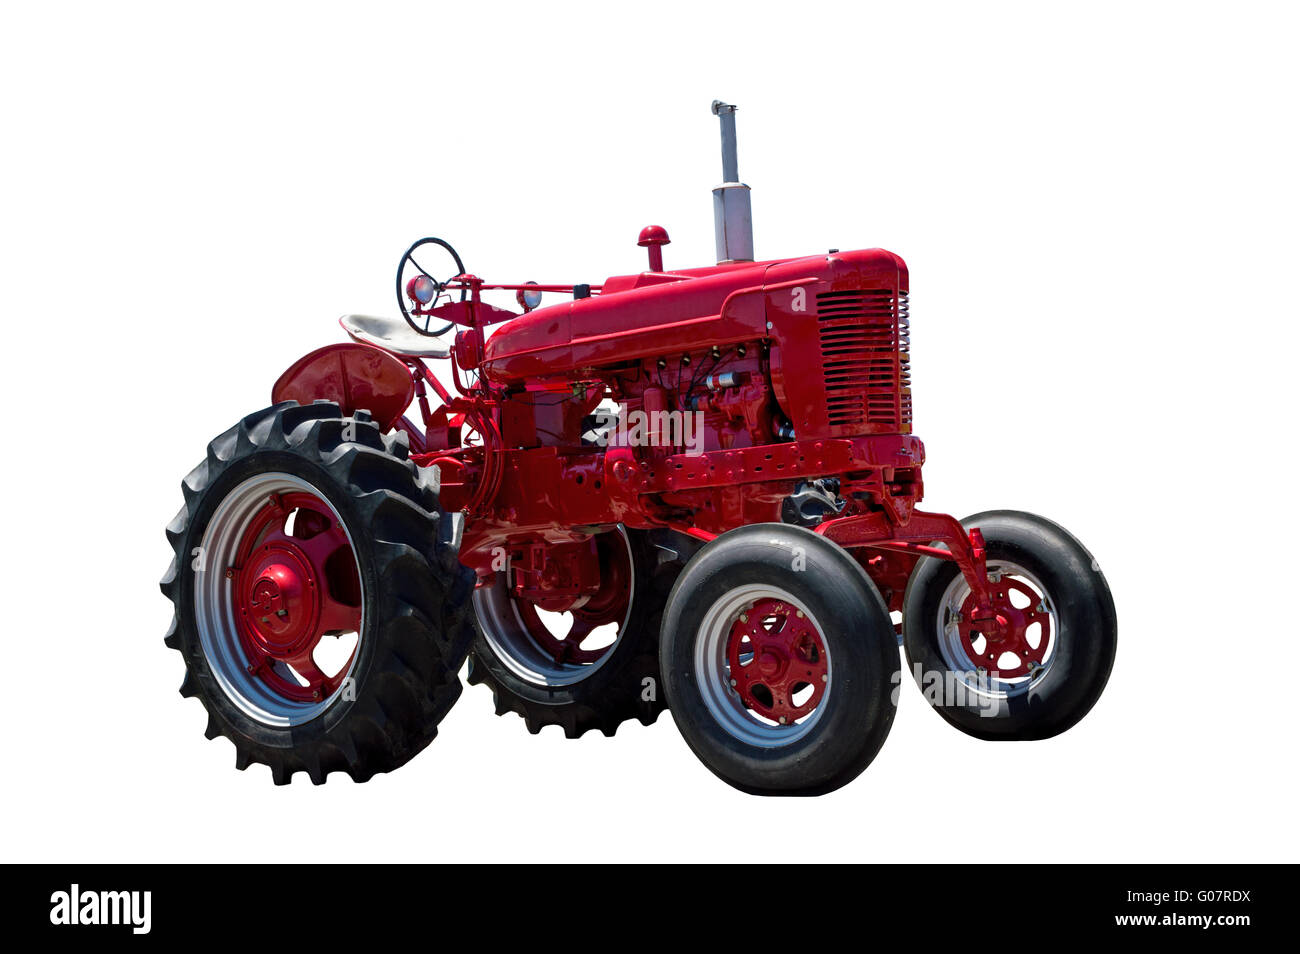 Big Red Tractor Isolated On White Stock Photo